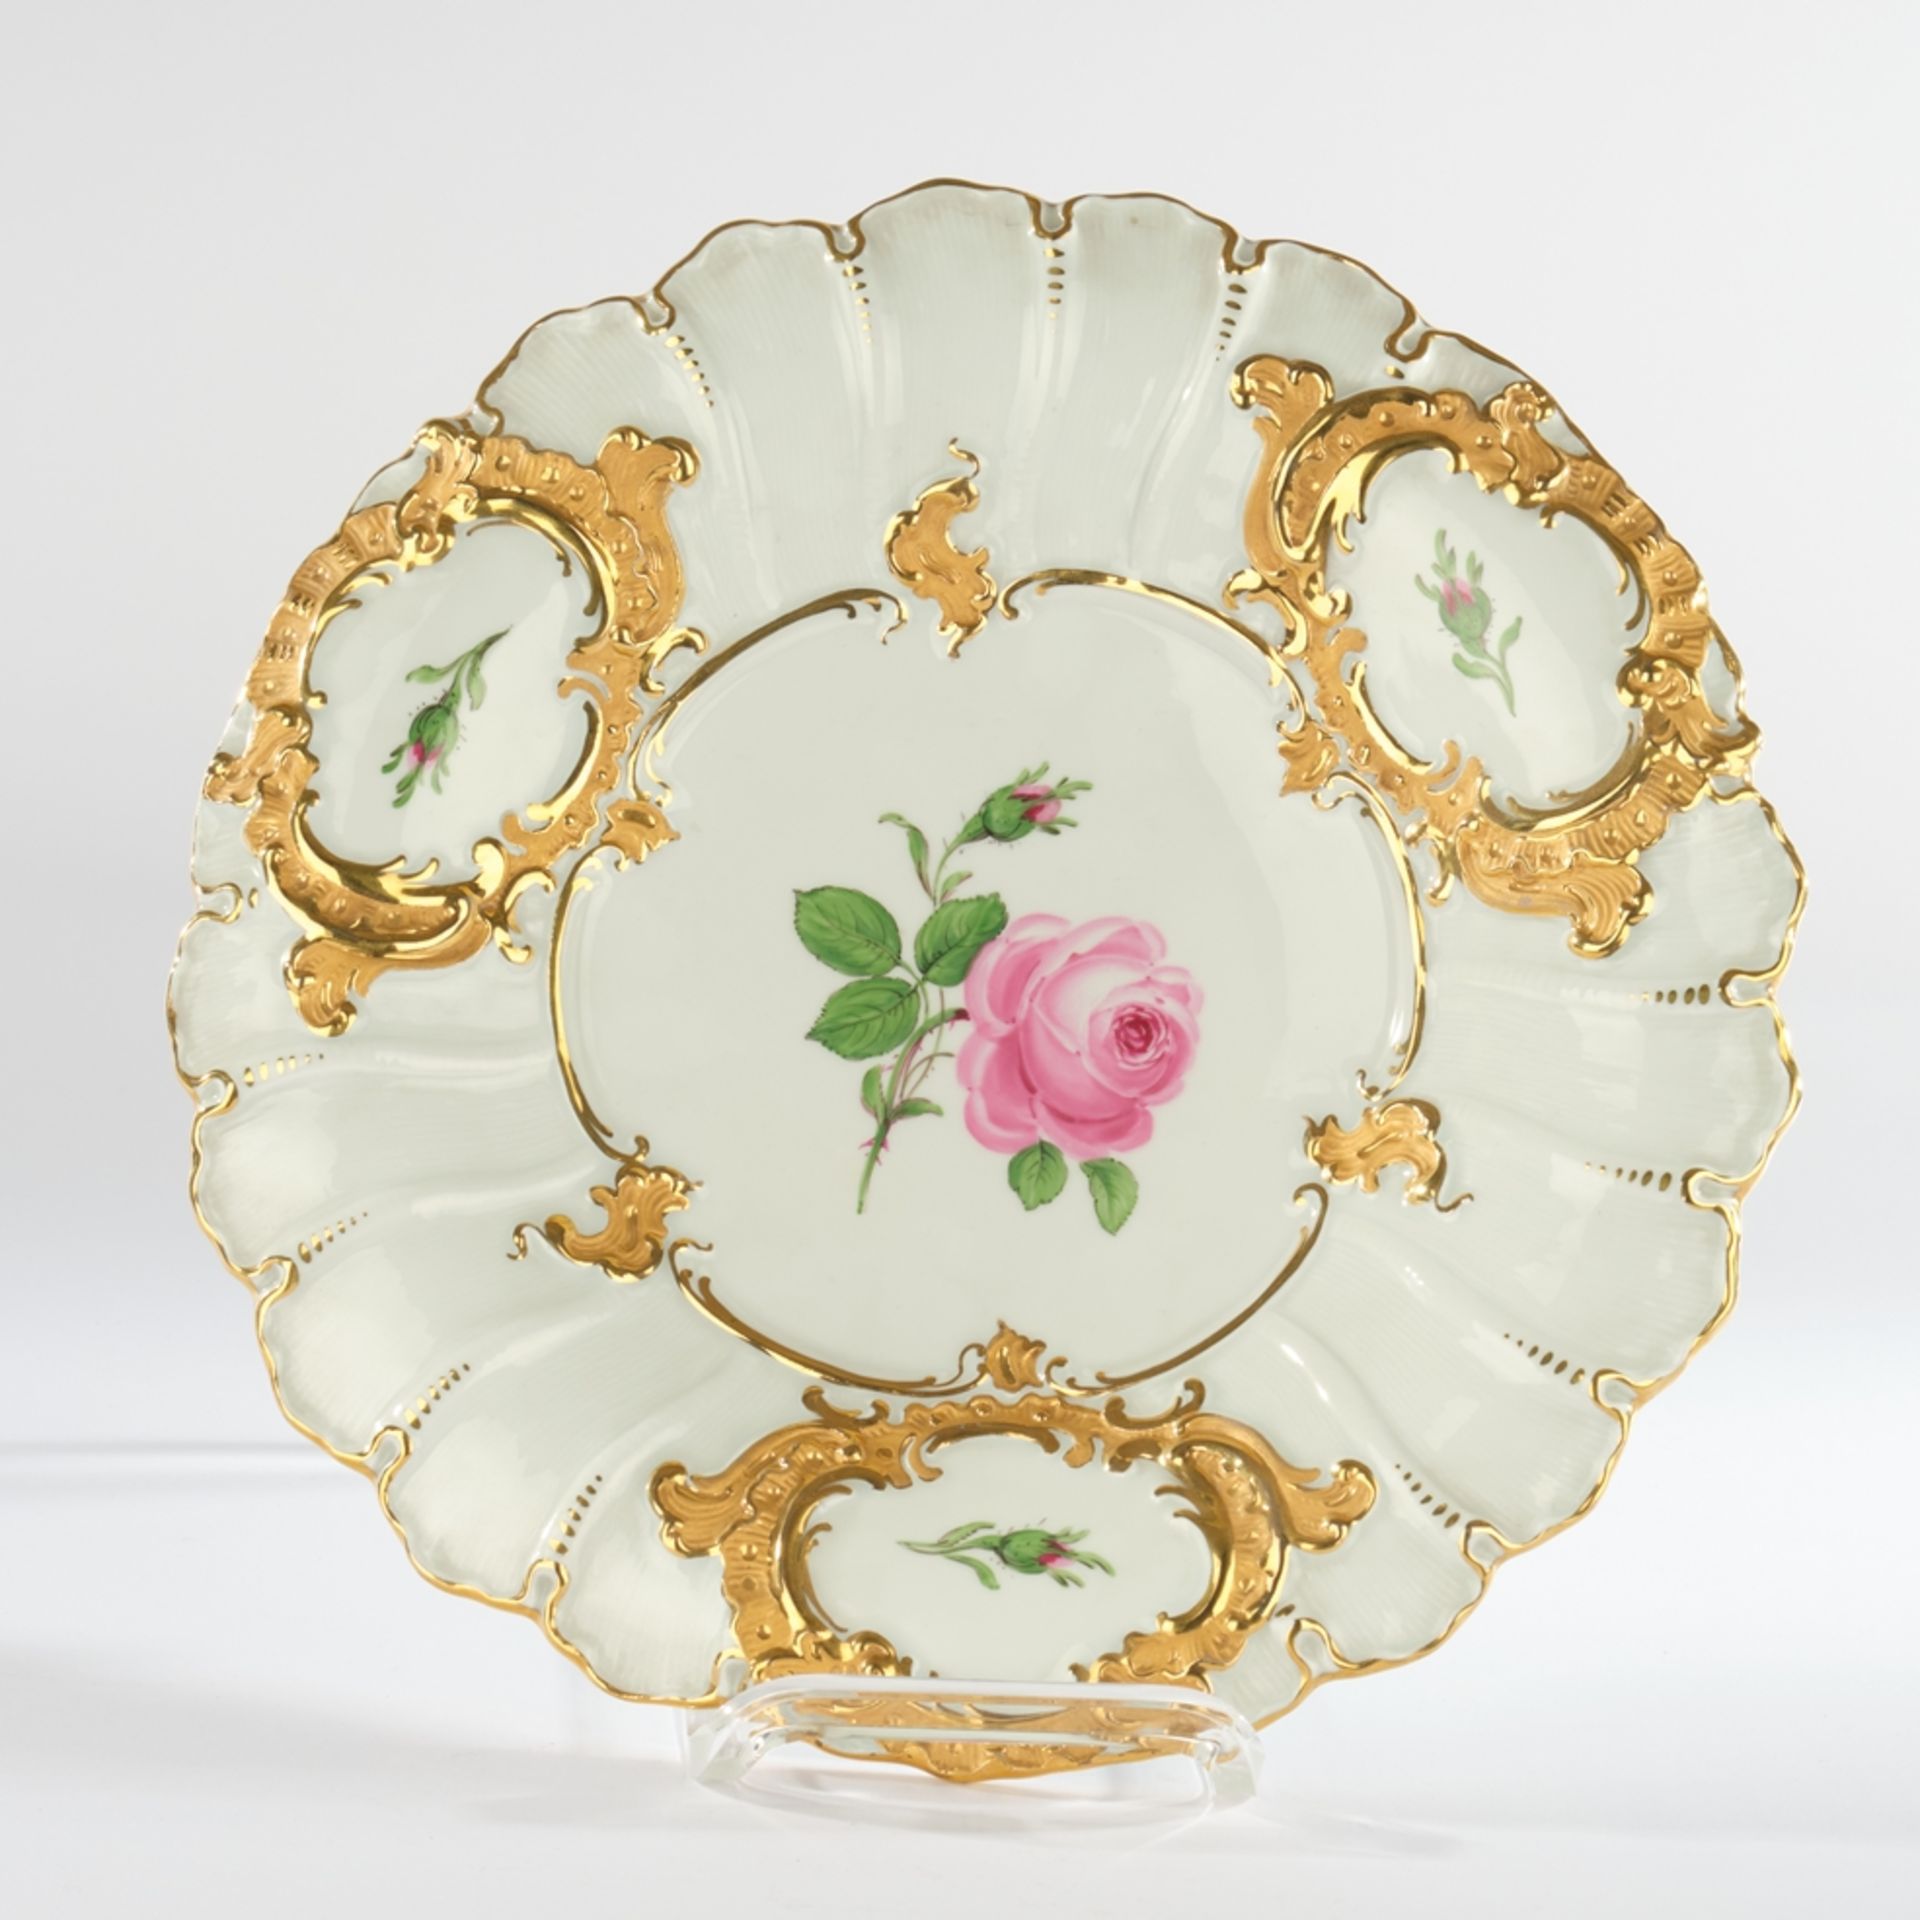 Pompous plate, Meissen, sword mark, 2nd choice, flag with reserves in gold bronze, red rose on whit